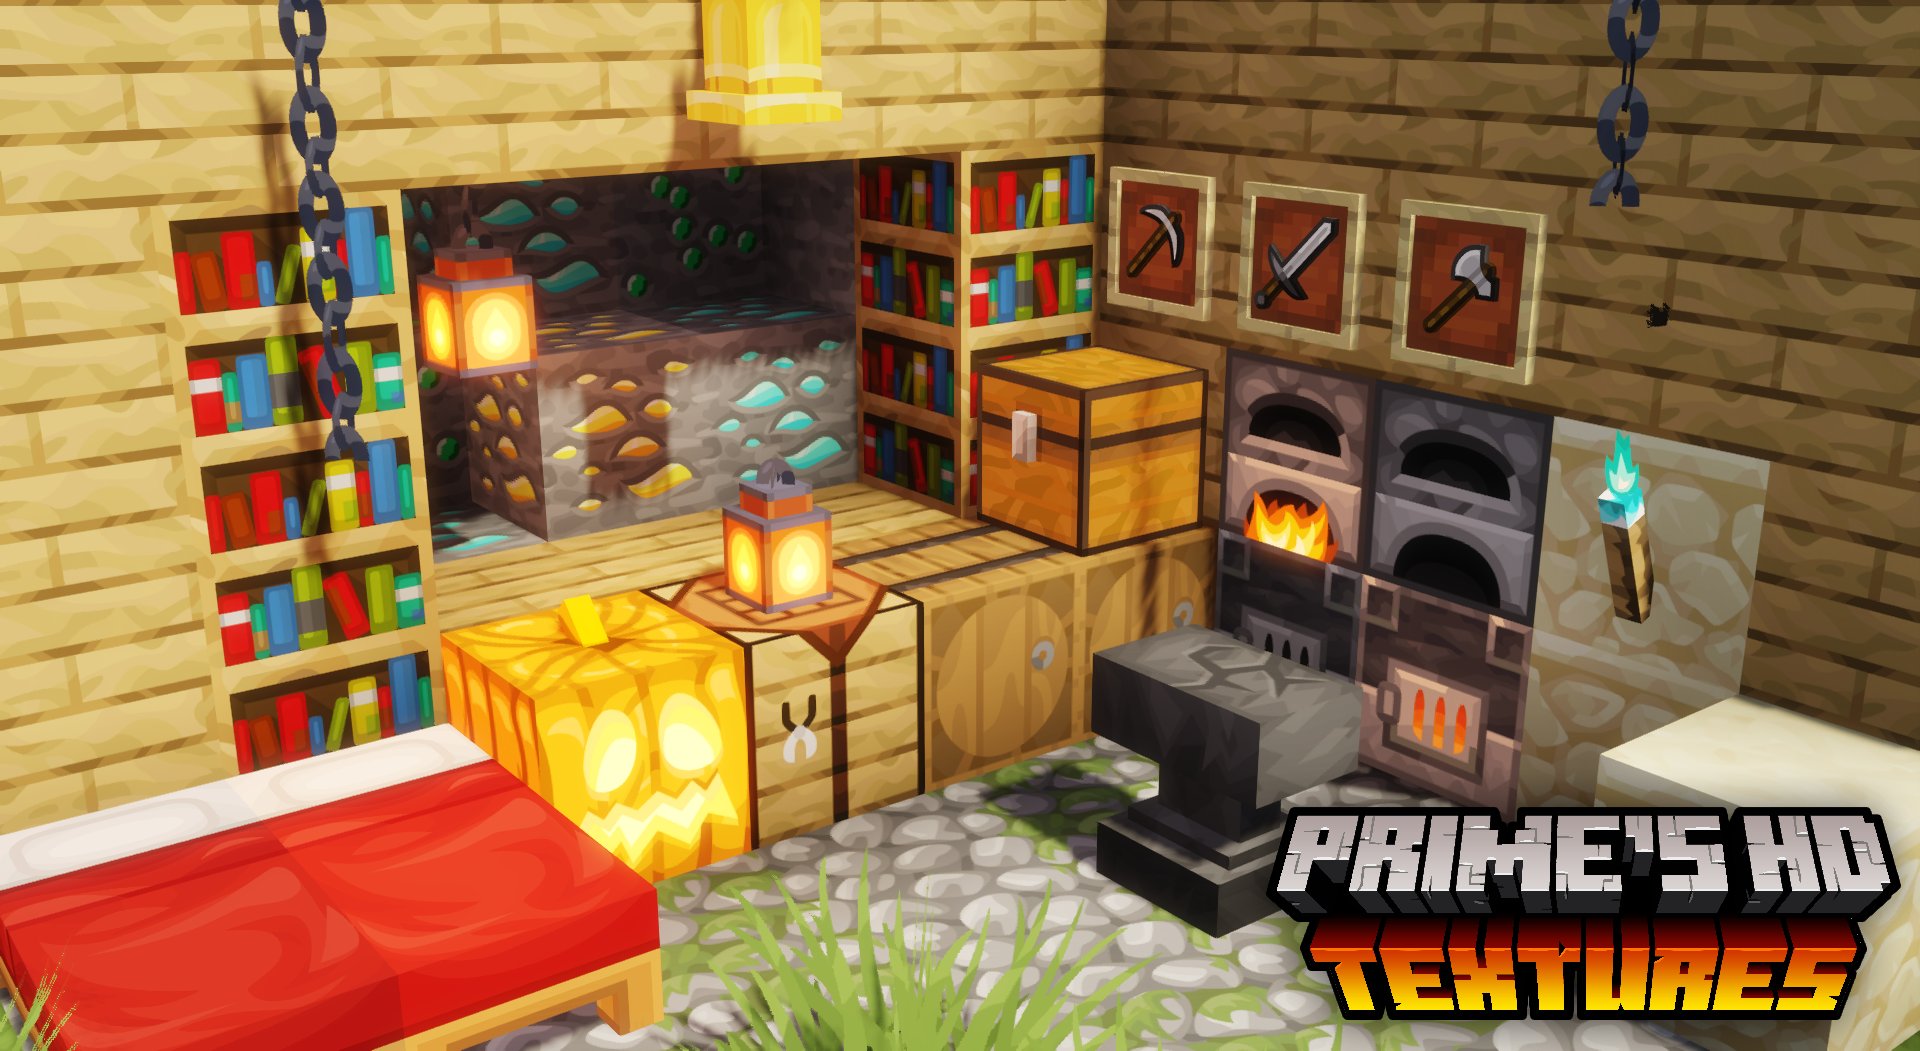 Prime First Ever Prime S Hd Textures Minecraft Resourcepack Giveaway Free Copy Of Prime S Hd Textures For Java At All Resolutions Including The Environment Add On 3 Winners Like Follow